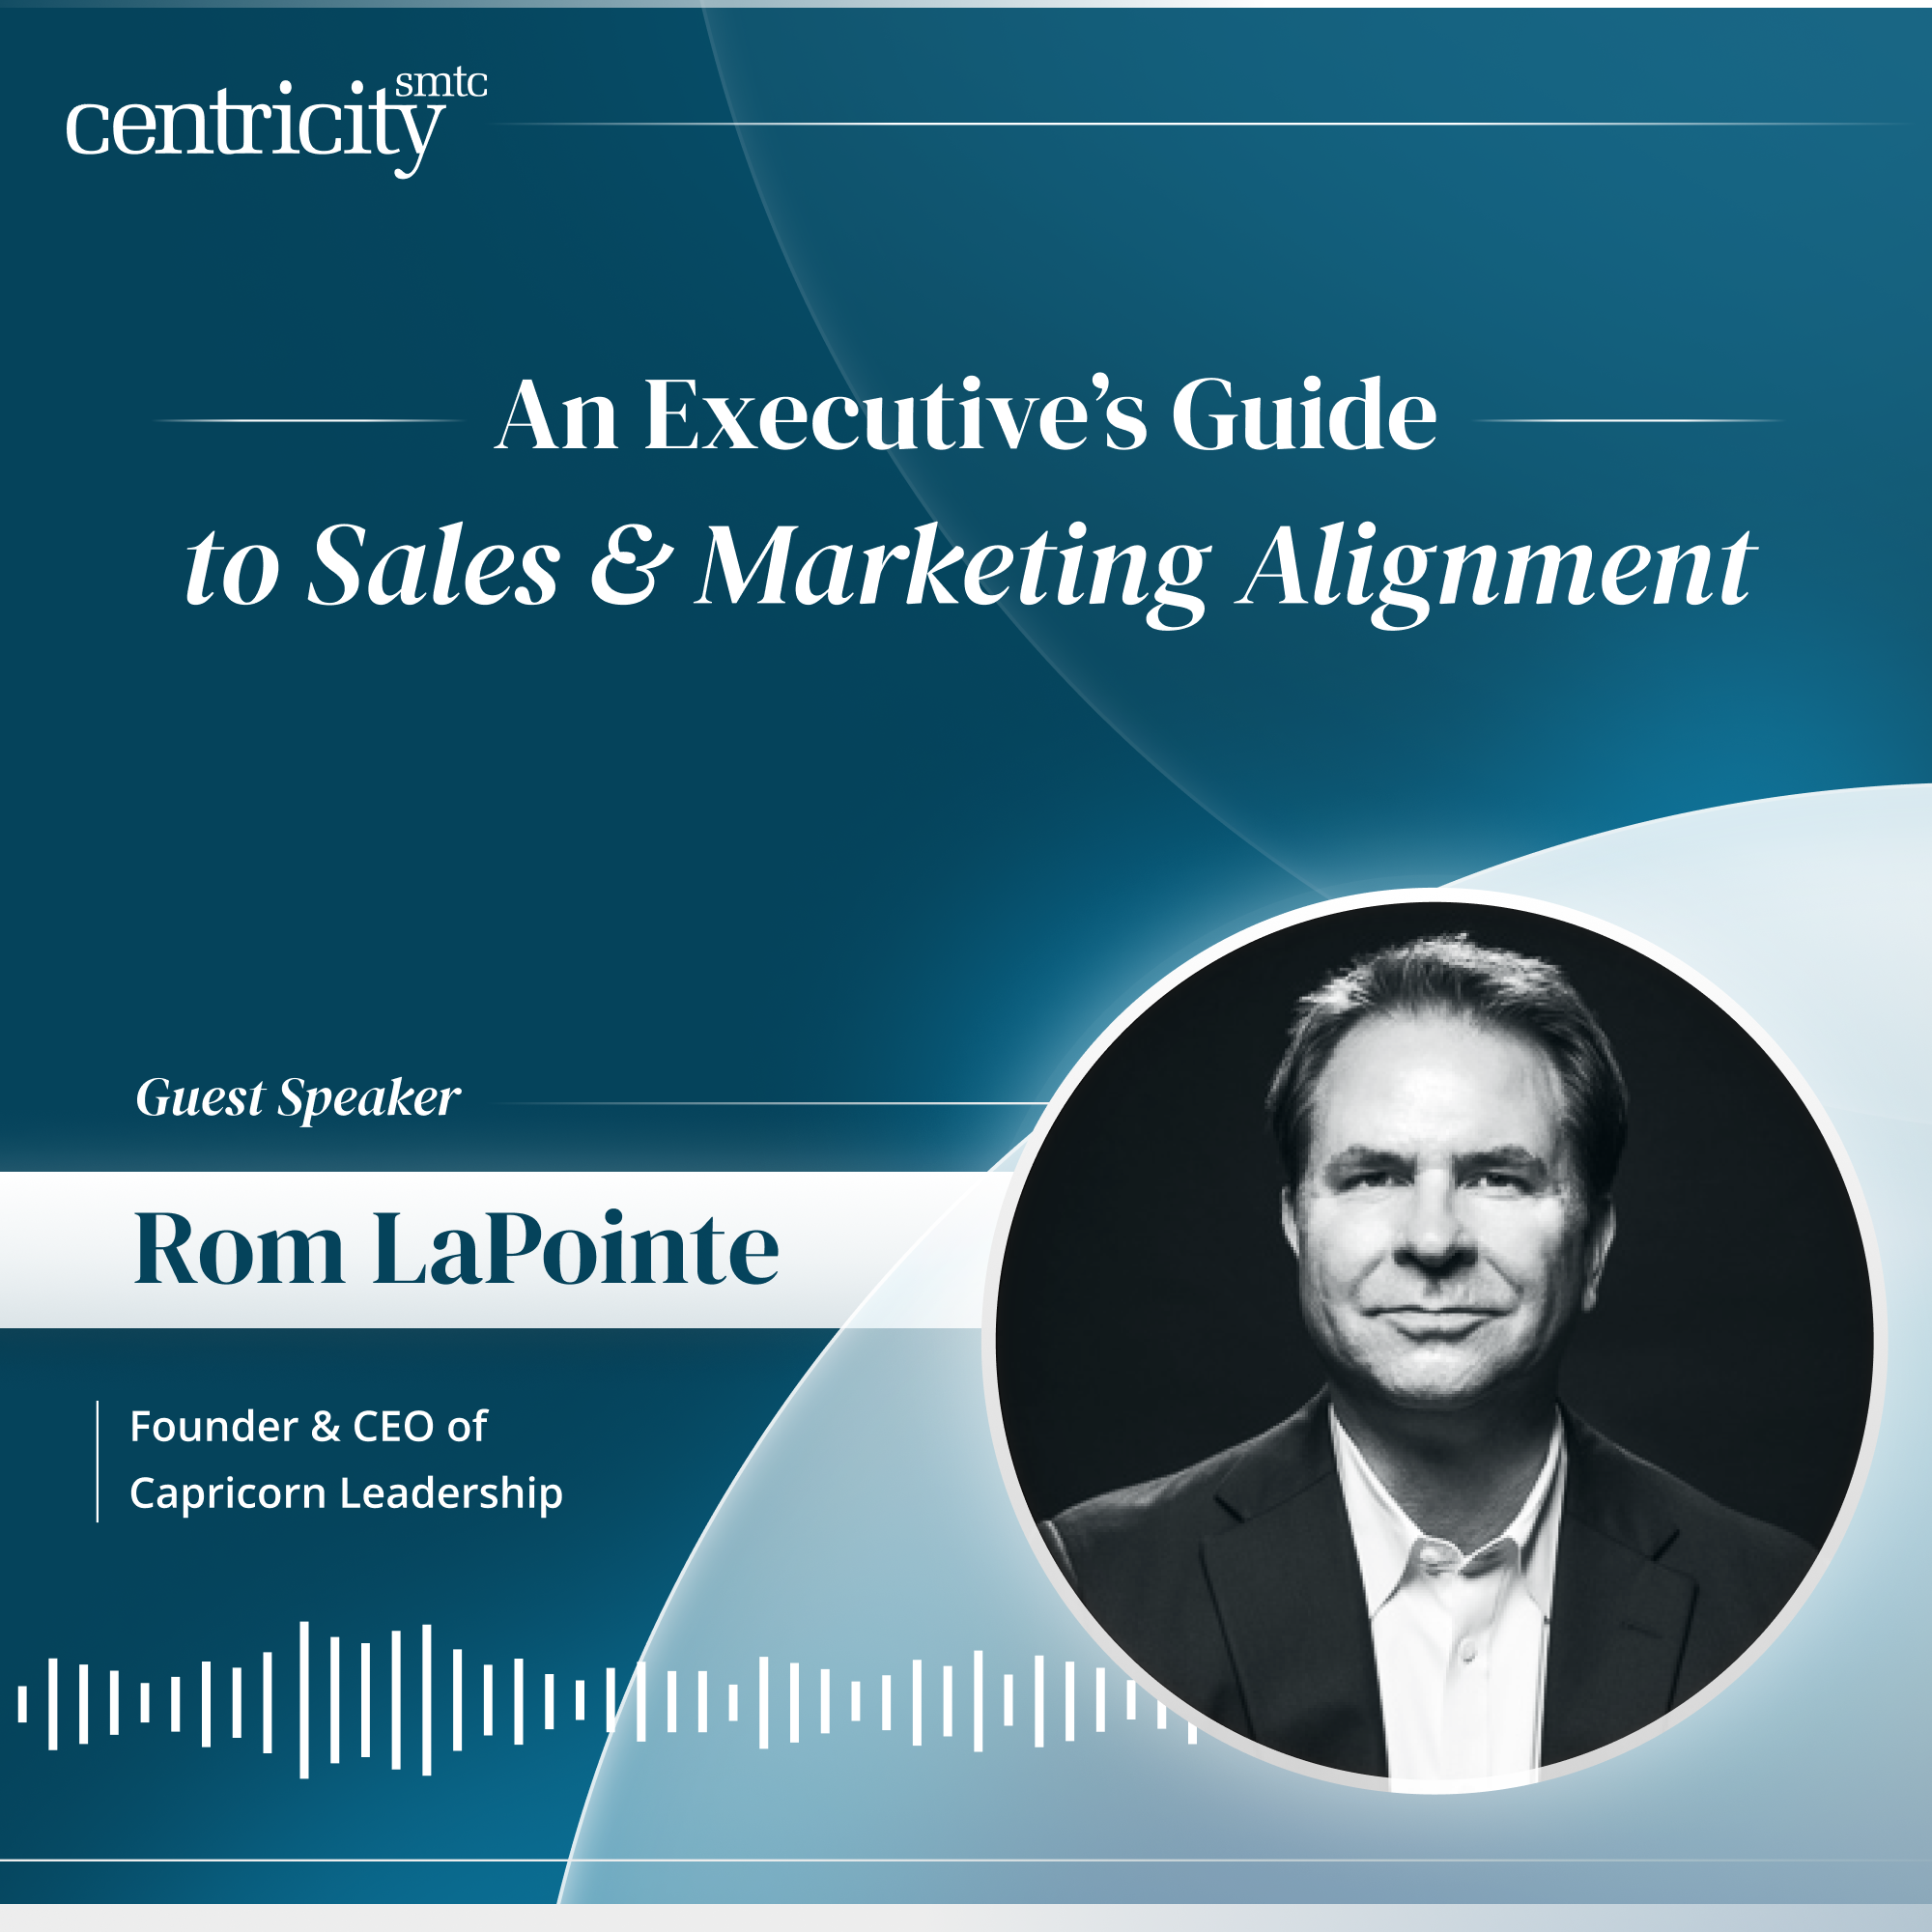 An Executive's Guide to Sales and Marketing Alignment